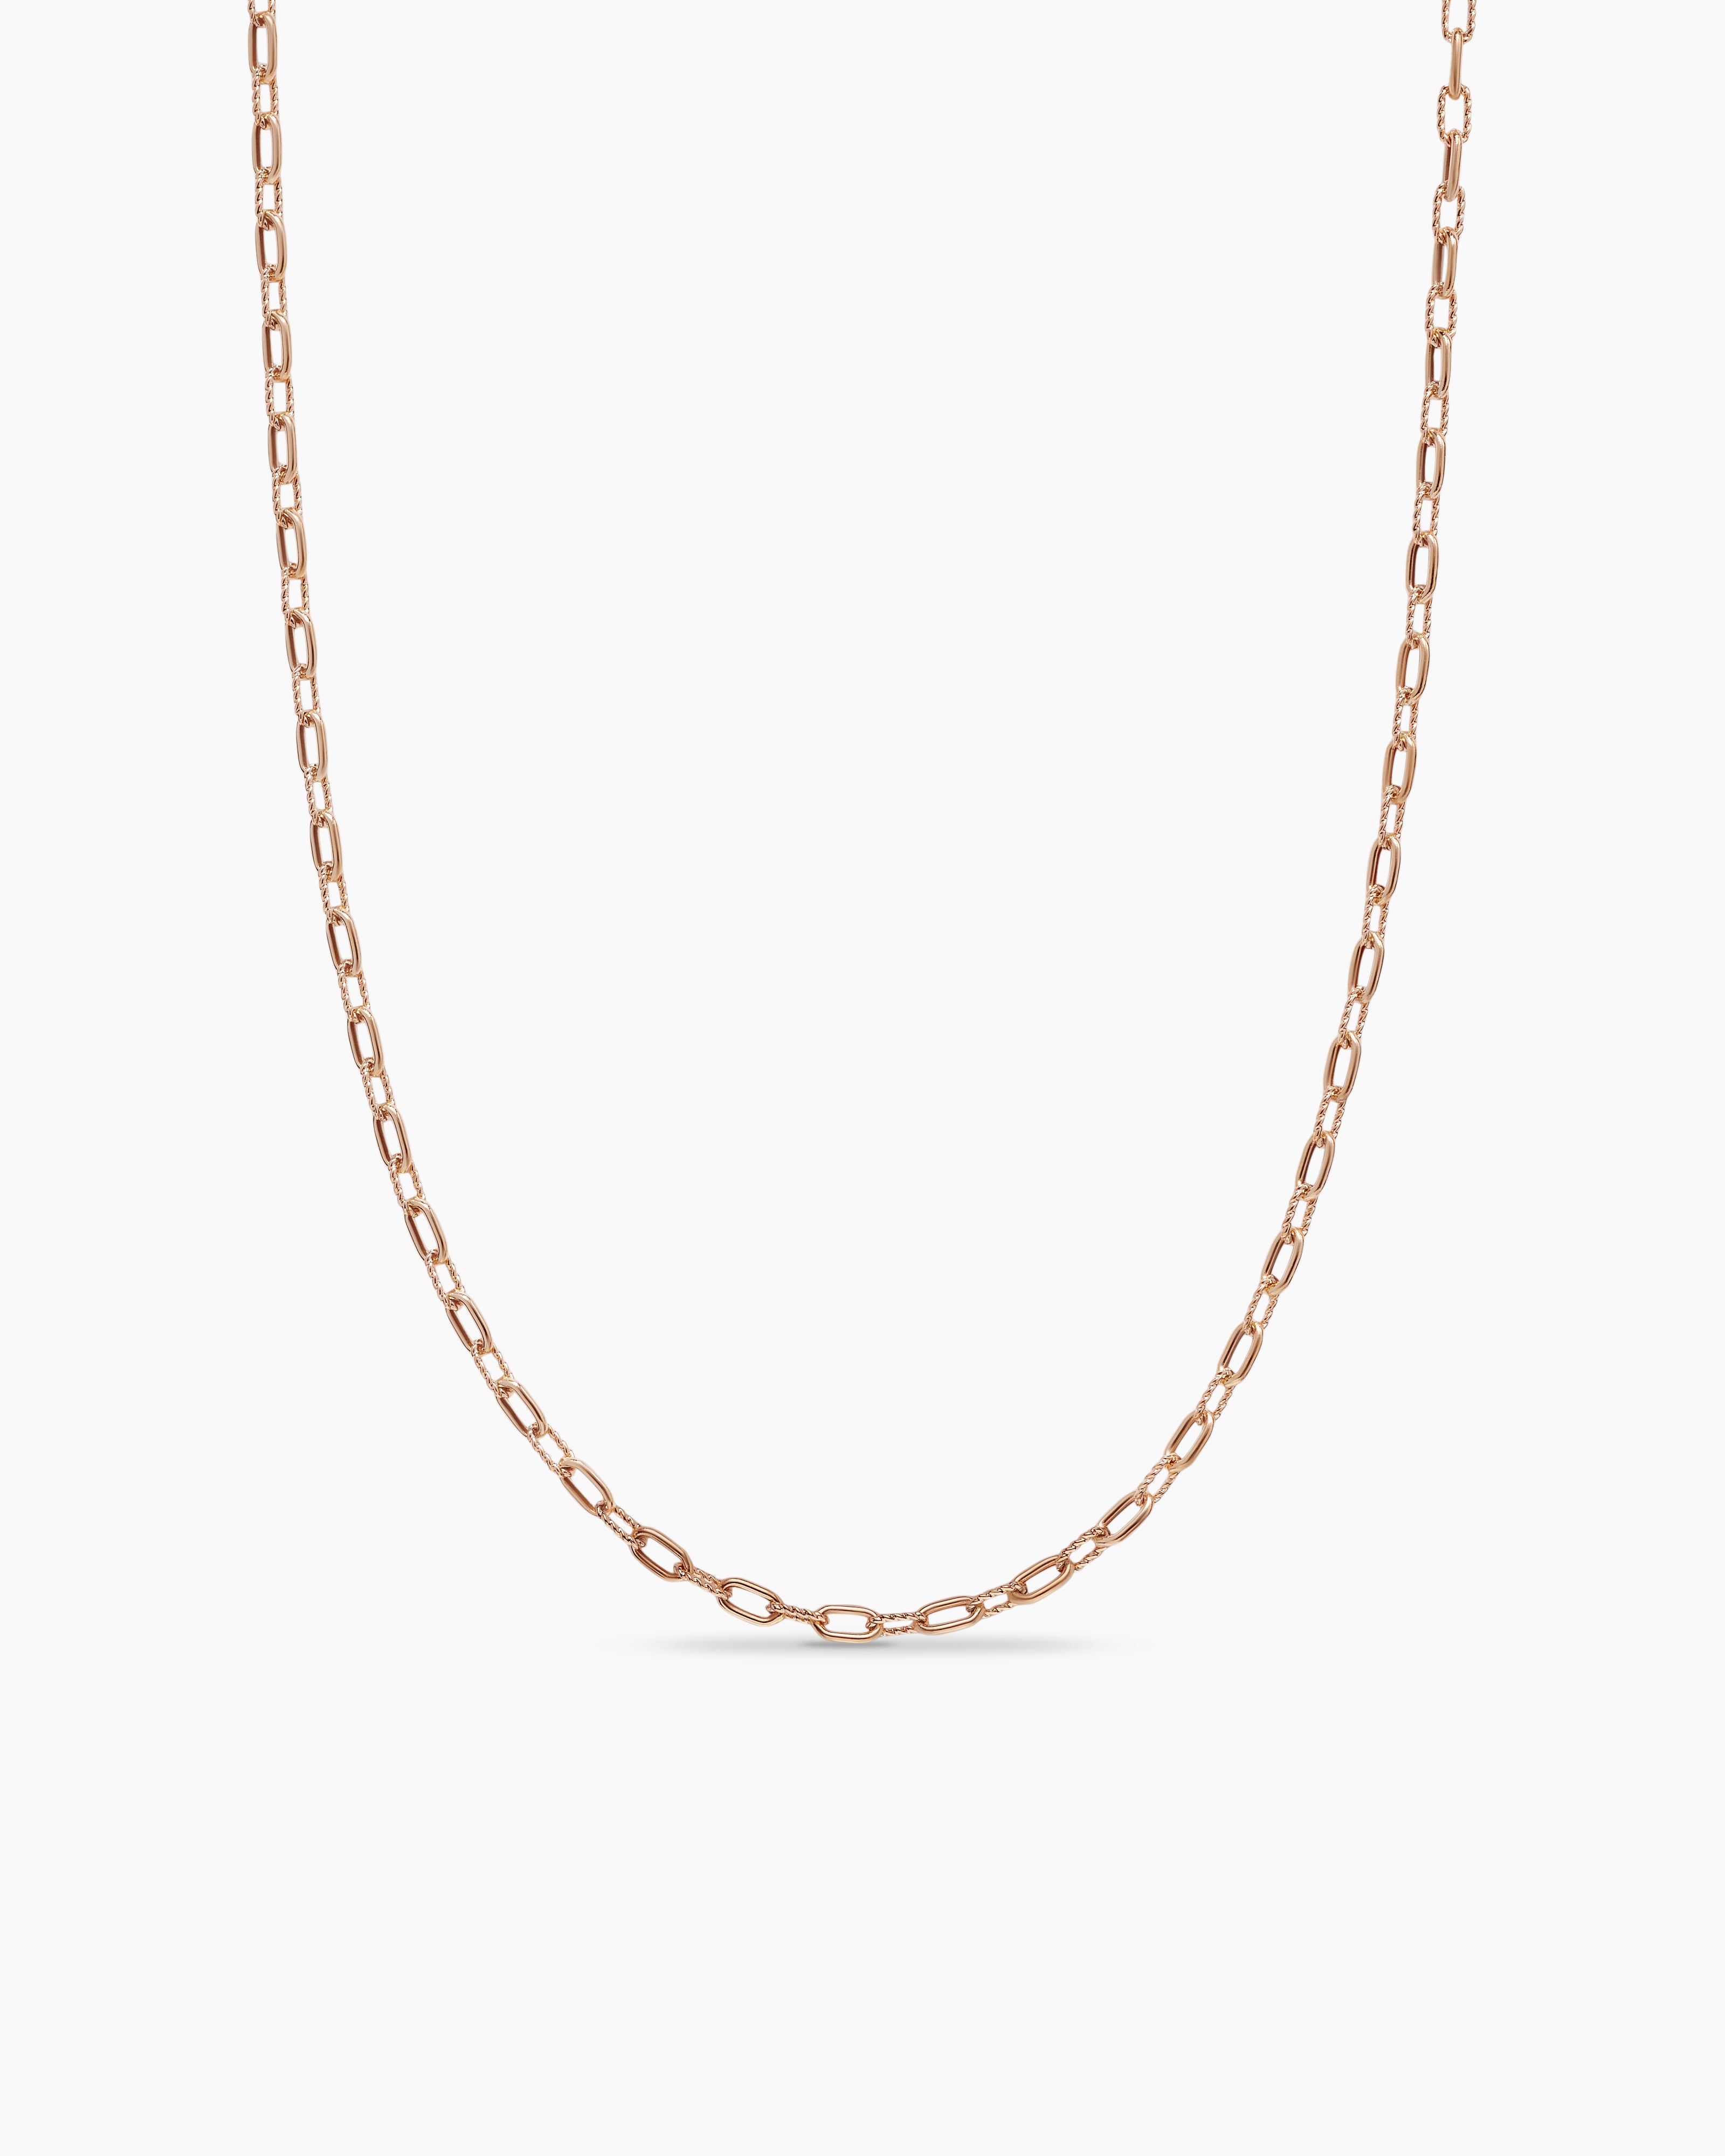 David Yurman Madison Chain Necklace in Sterling Silver with Diamond Toggle